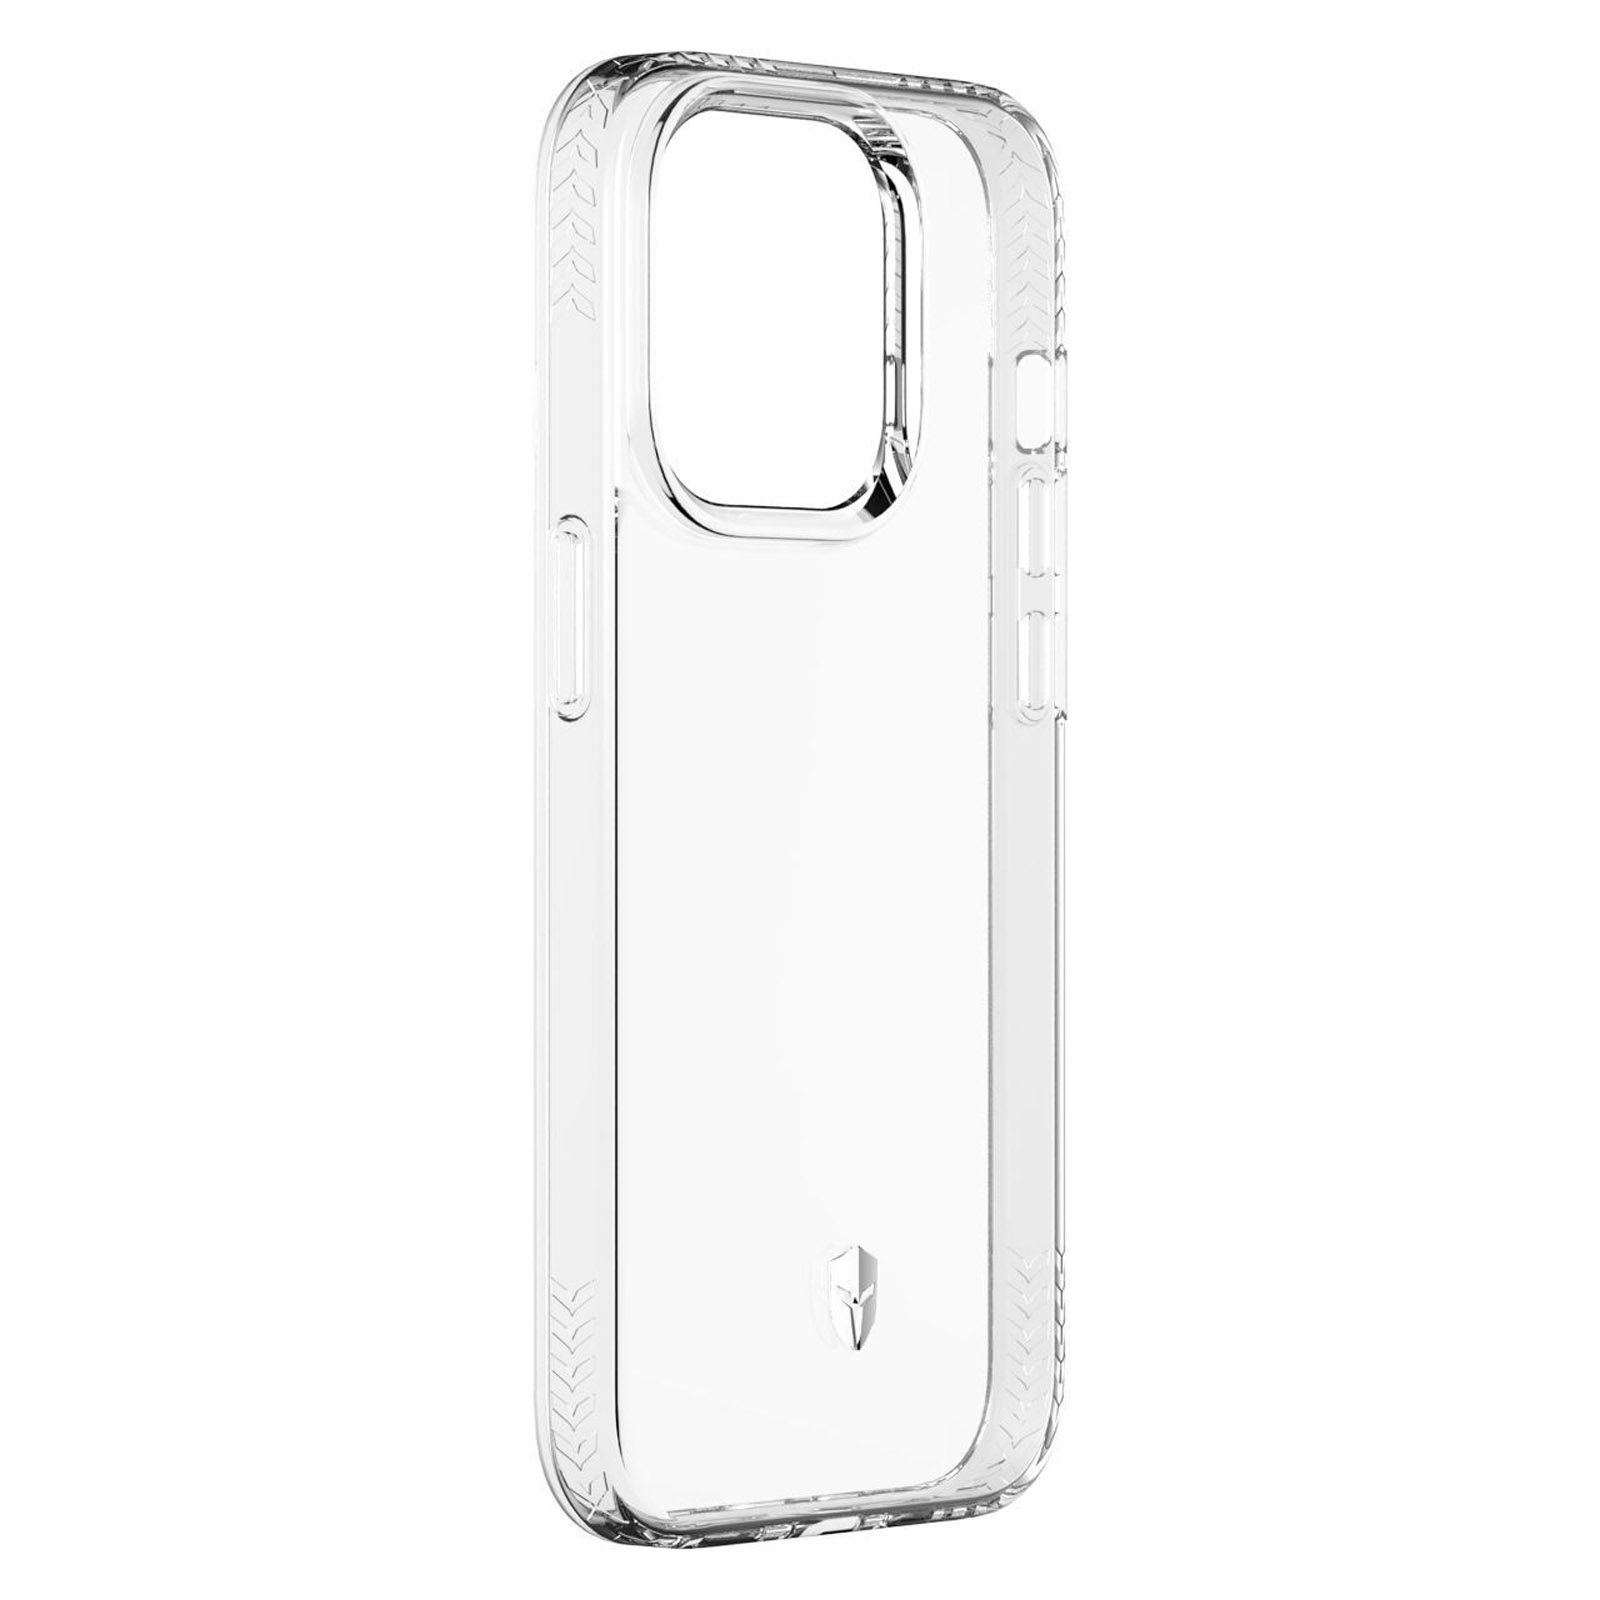 Series, Backcover, CASE Pro Transparent 14 iPhone Max, Apple, Pulse FORCE Handyhülle